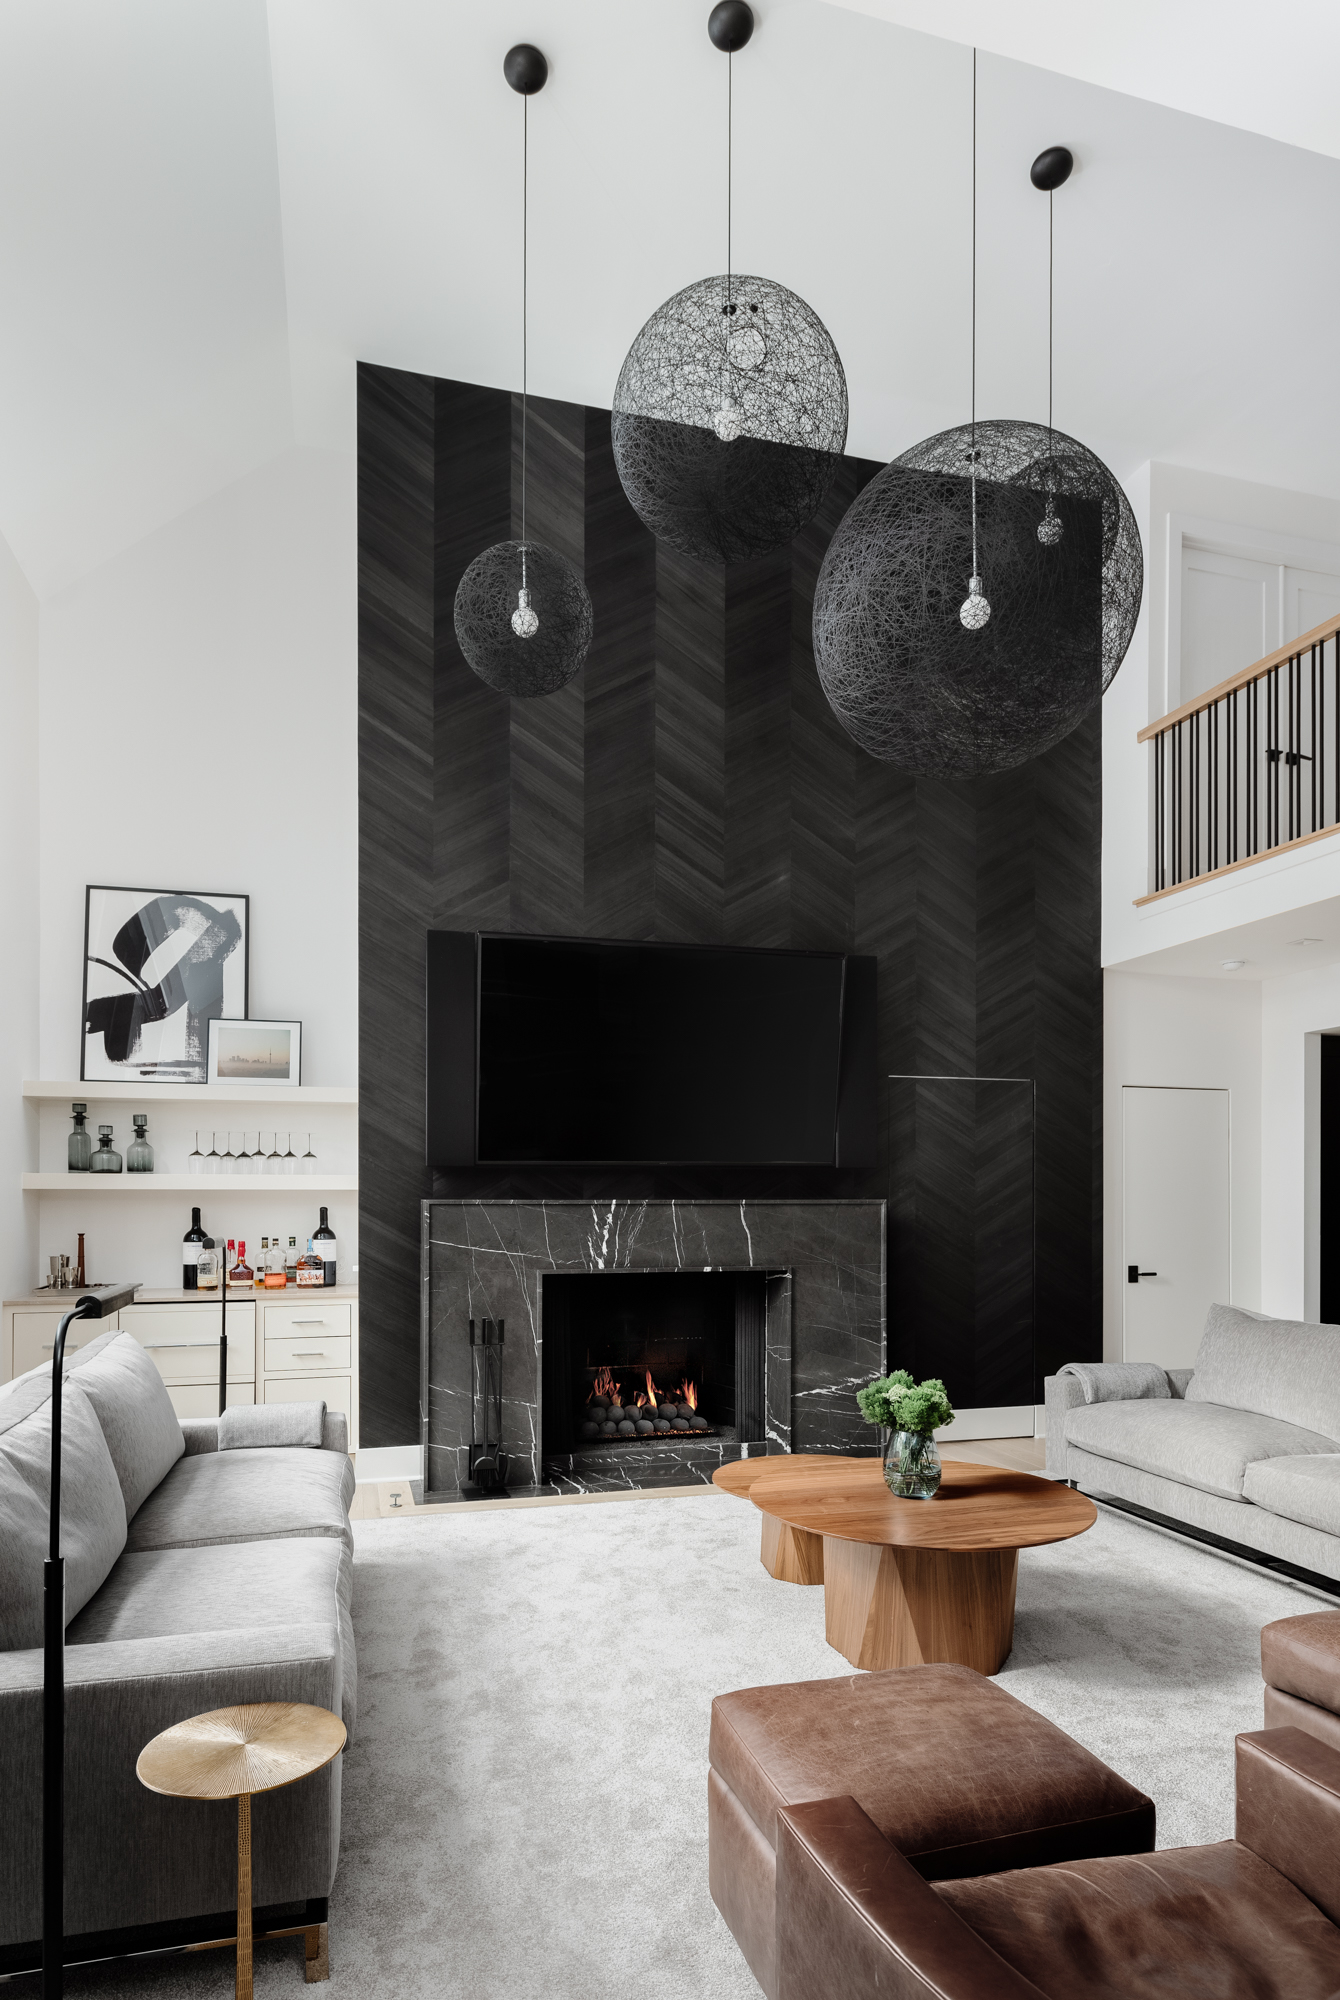 Modern living room with black marble fireplace and chevron wallpaper, black windows, white walls, dry bar. Interior Design by LC Interiors, best interior designer in Naperville, Illinois.